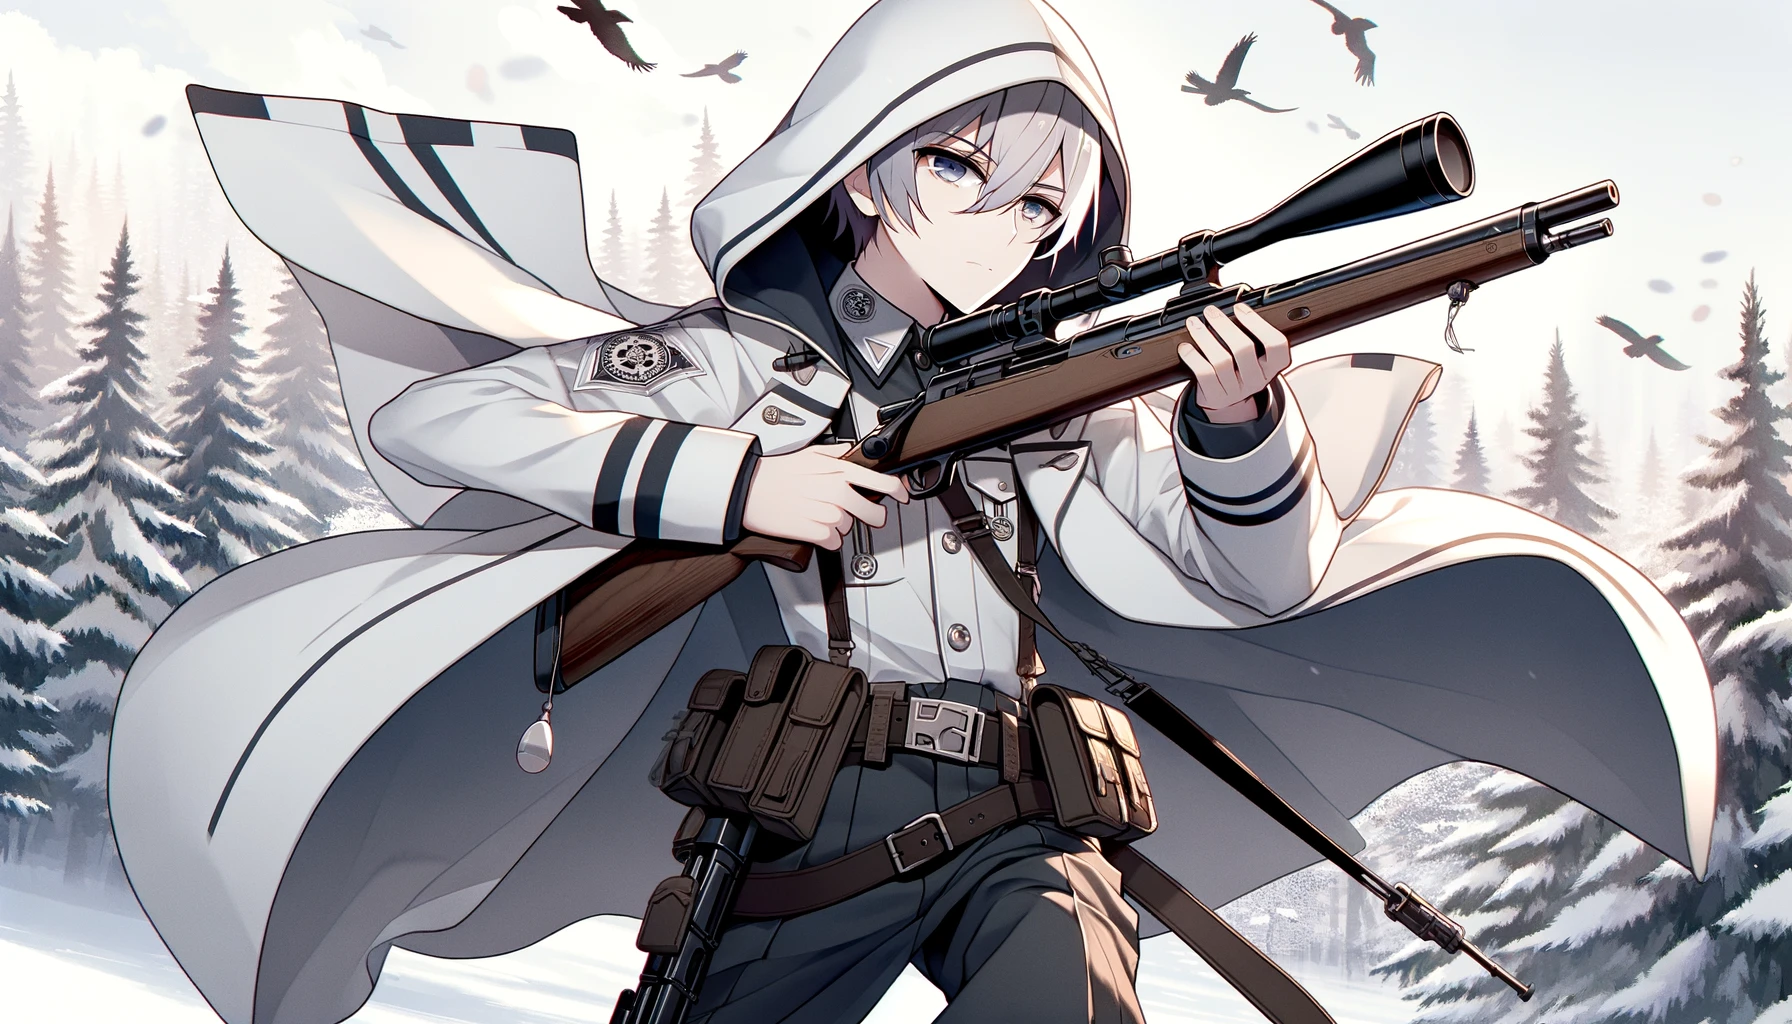 Anime-style image of a male character wearing a military uniform with a white hood, holding a long hunting rifle. The character appears in a dynamic pose, the background subtly suggesting a snowy forest, in a 16:9 aspect ratio.